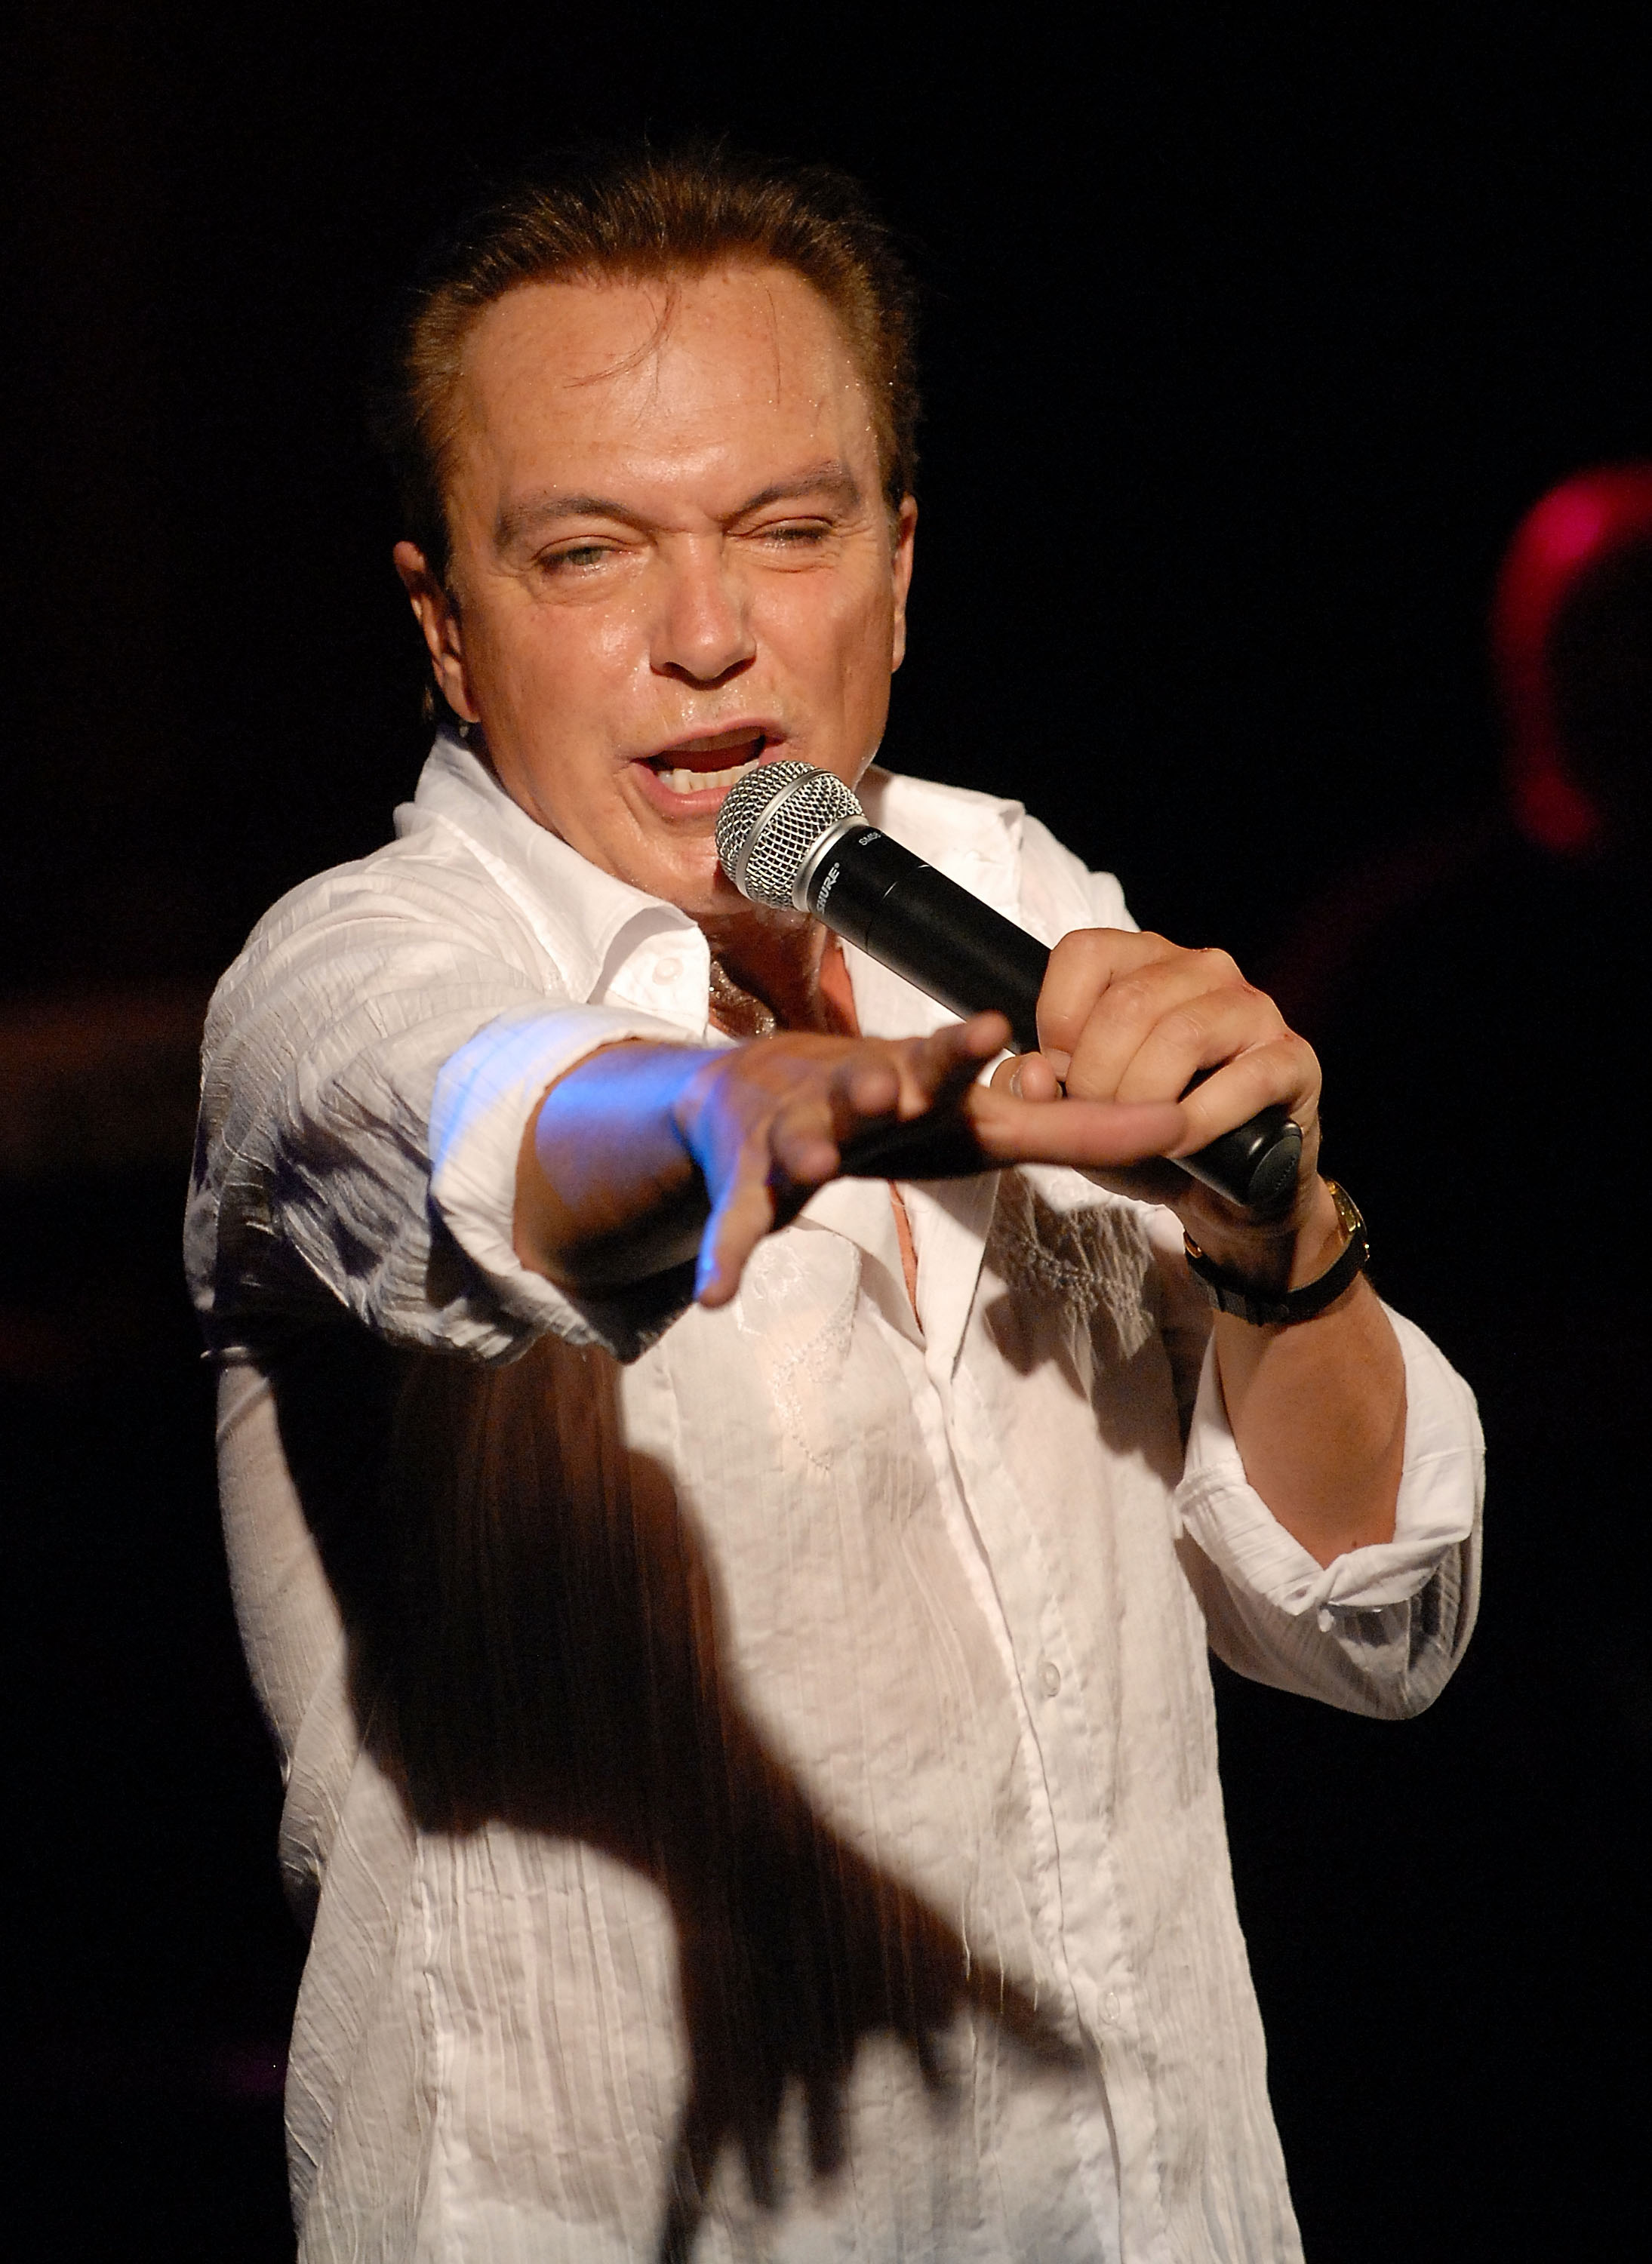 David Cassidy perfoms at the "The Ultimate Idols" concert with Davy Jones at St. George Theatre on September 13, 2008 in Staten Island, New York. | Source: Getty Images